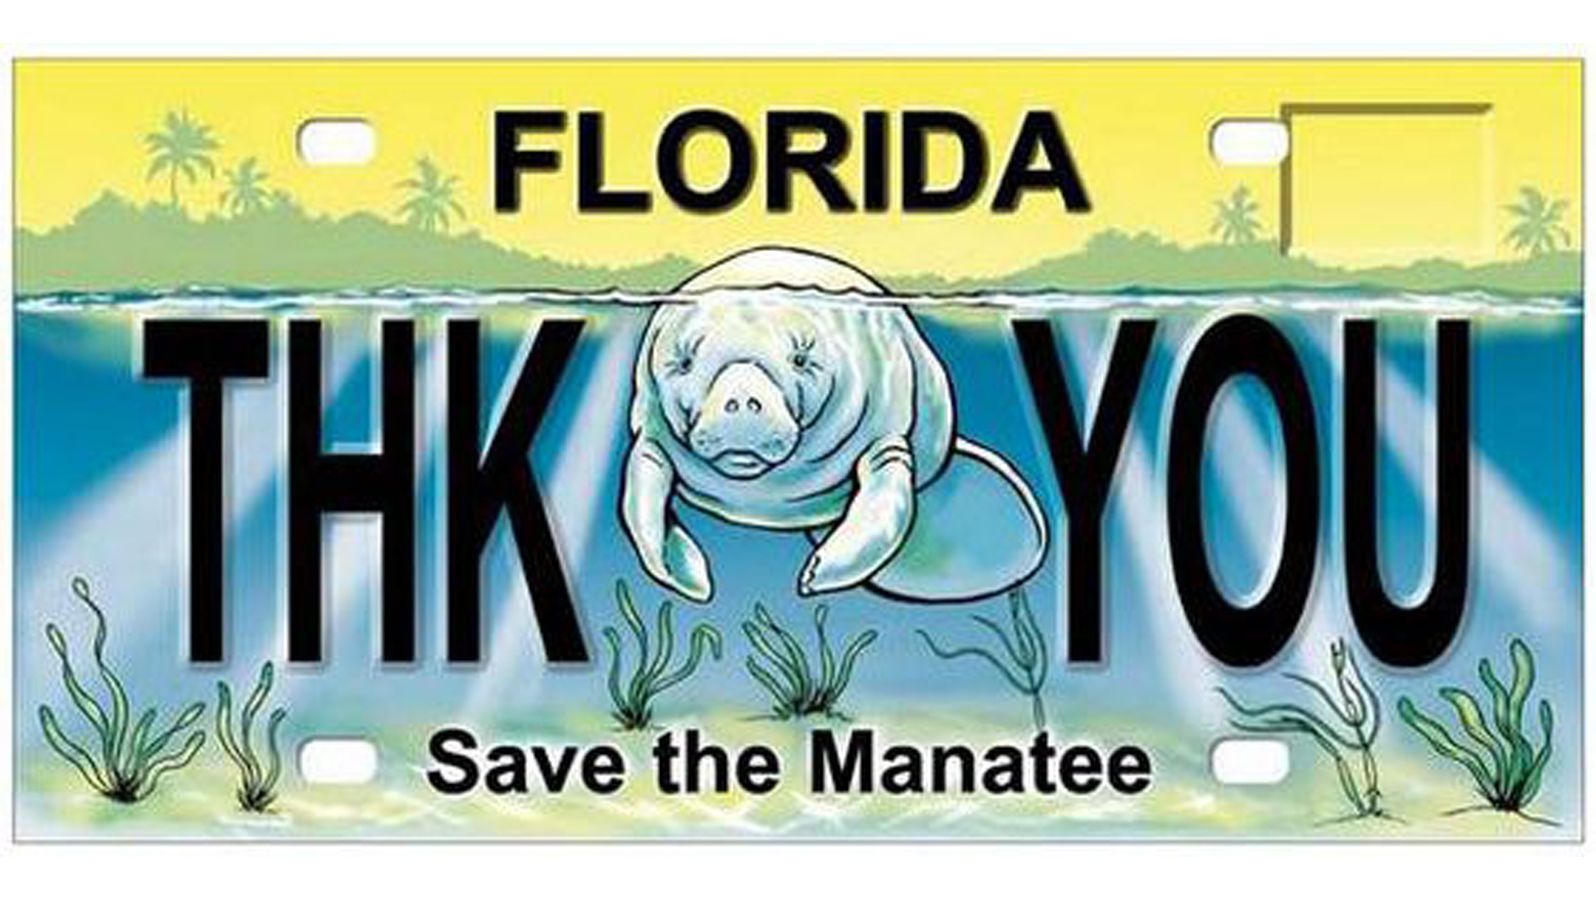 A sample of the "Save the Manatee" plate, used to raise money for manatee protection.